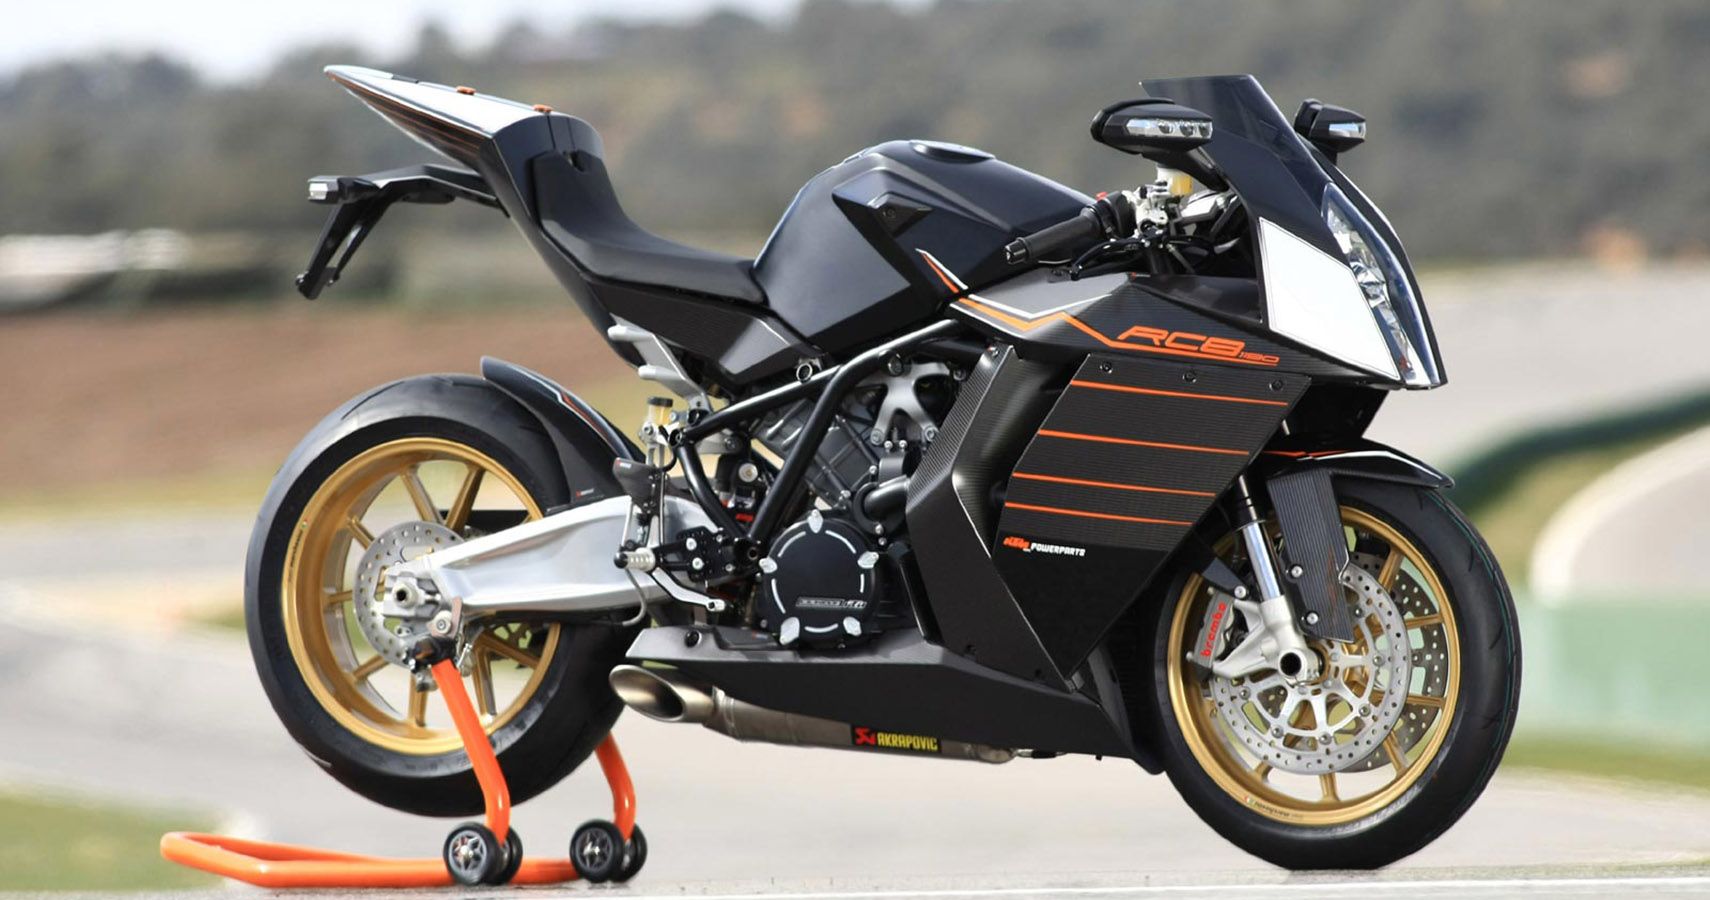 The KTM RC8 parked on the track.